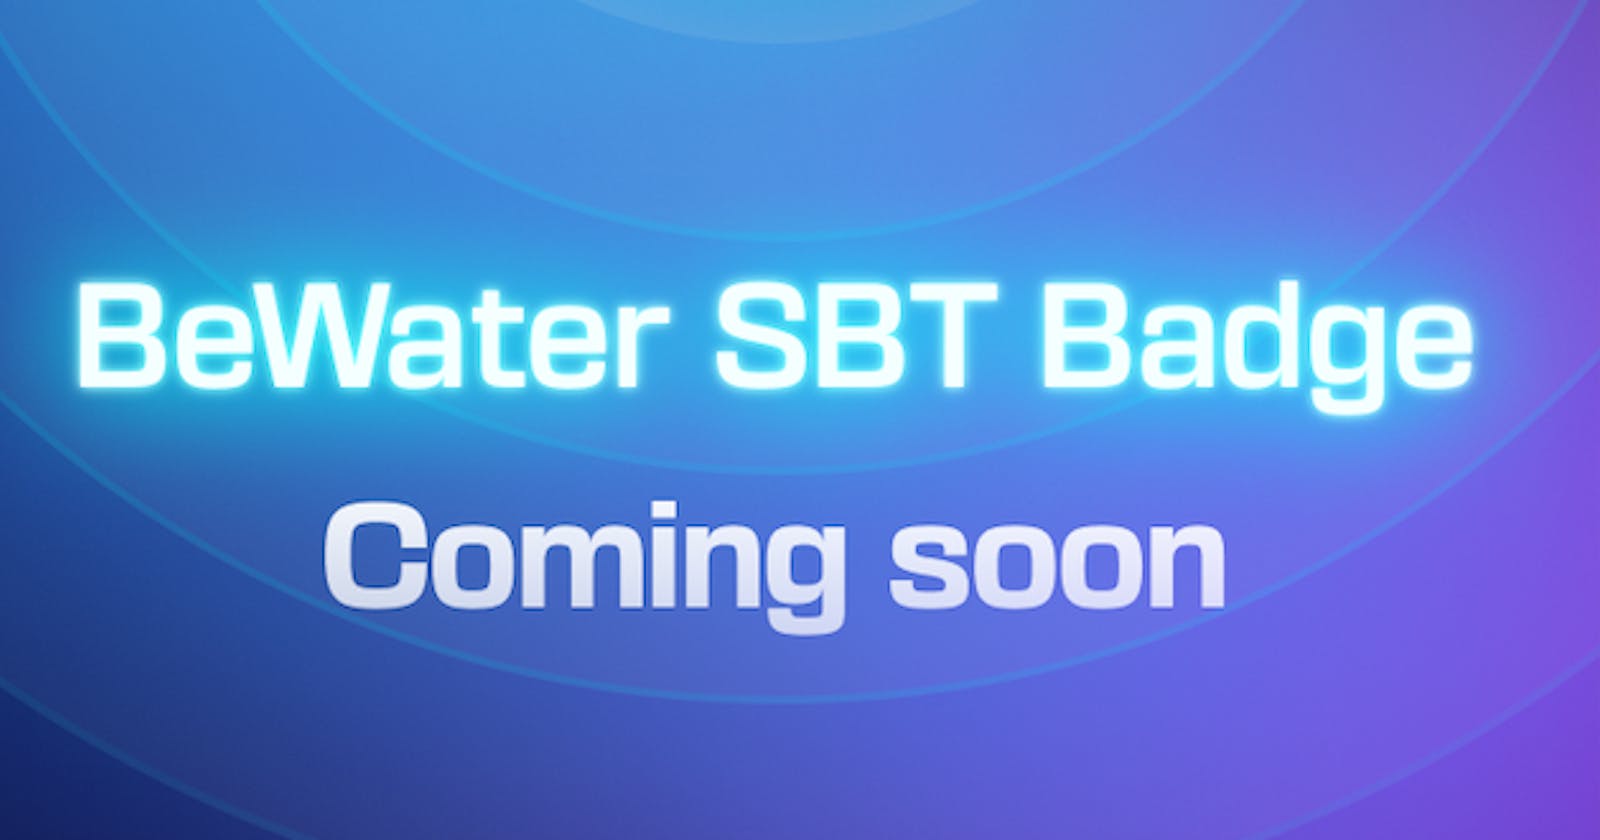 Unleash Your Power as an Early User with BeWater's Genesis Badge SBT Airdrop Program and Unlock Exclusive Benefits!